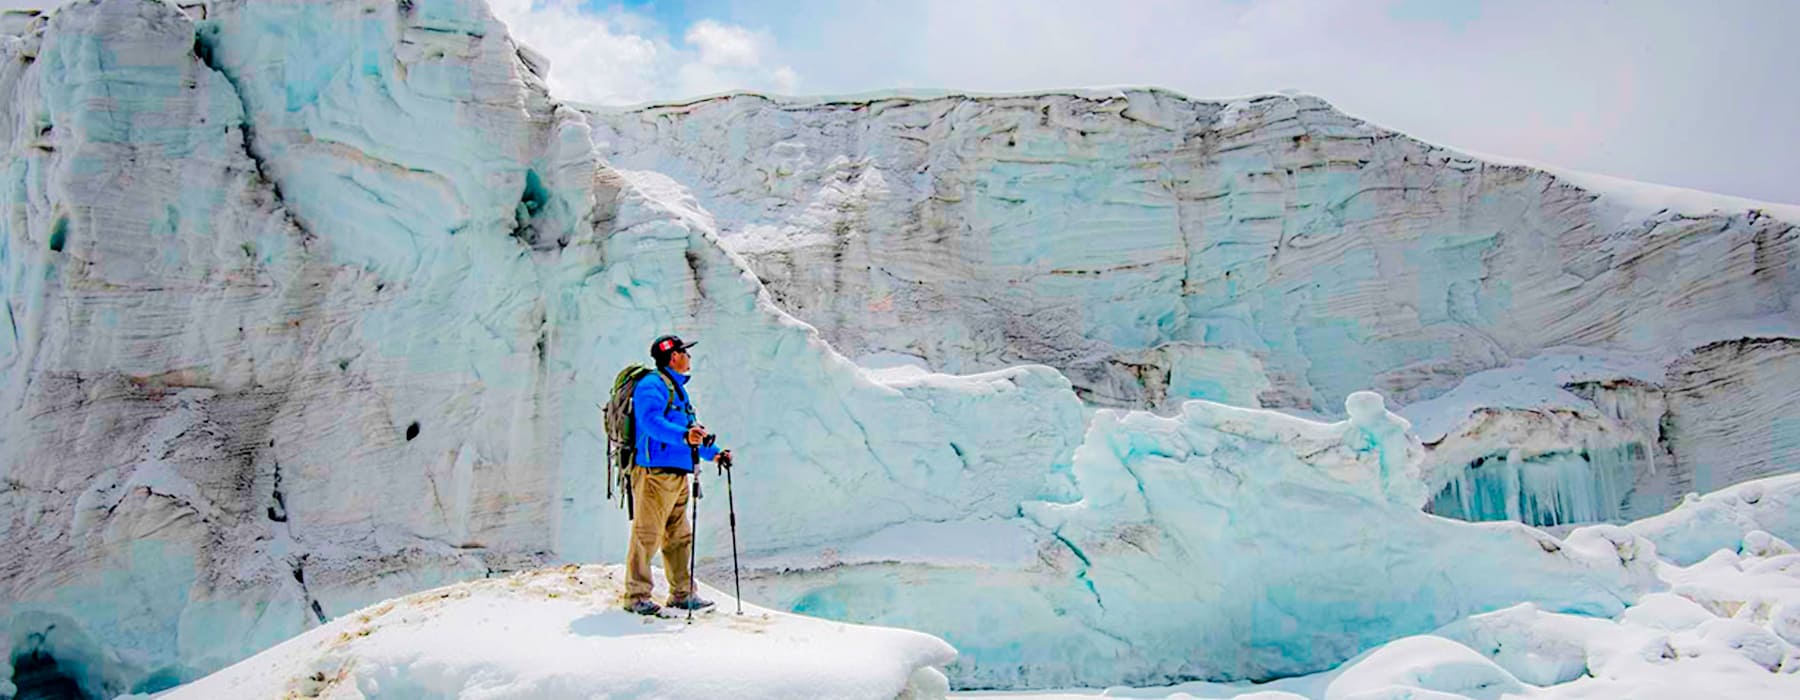 QUELCCAYA: THE LARGEST TROPICAL GLACIER IN THE WORLD